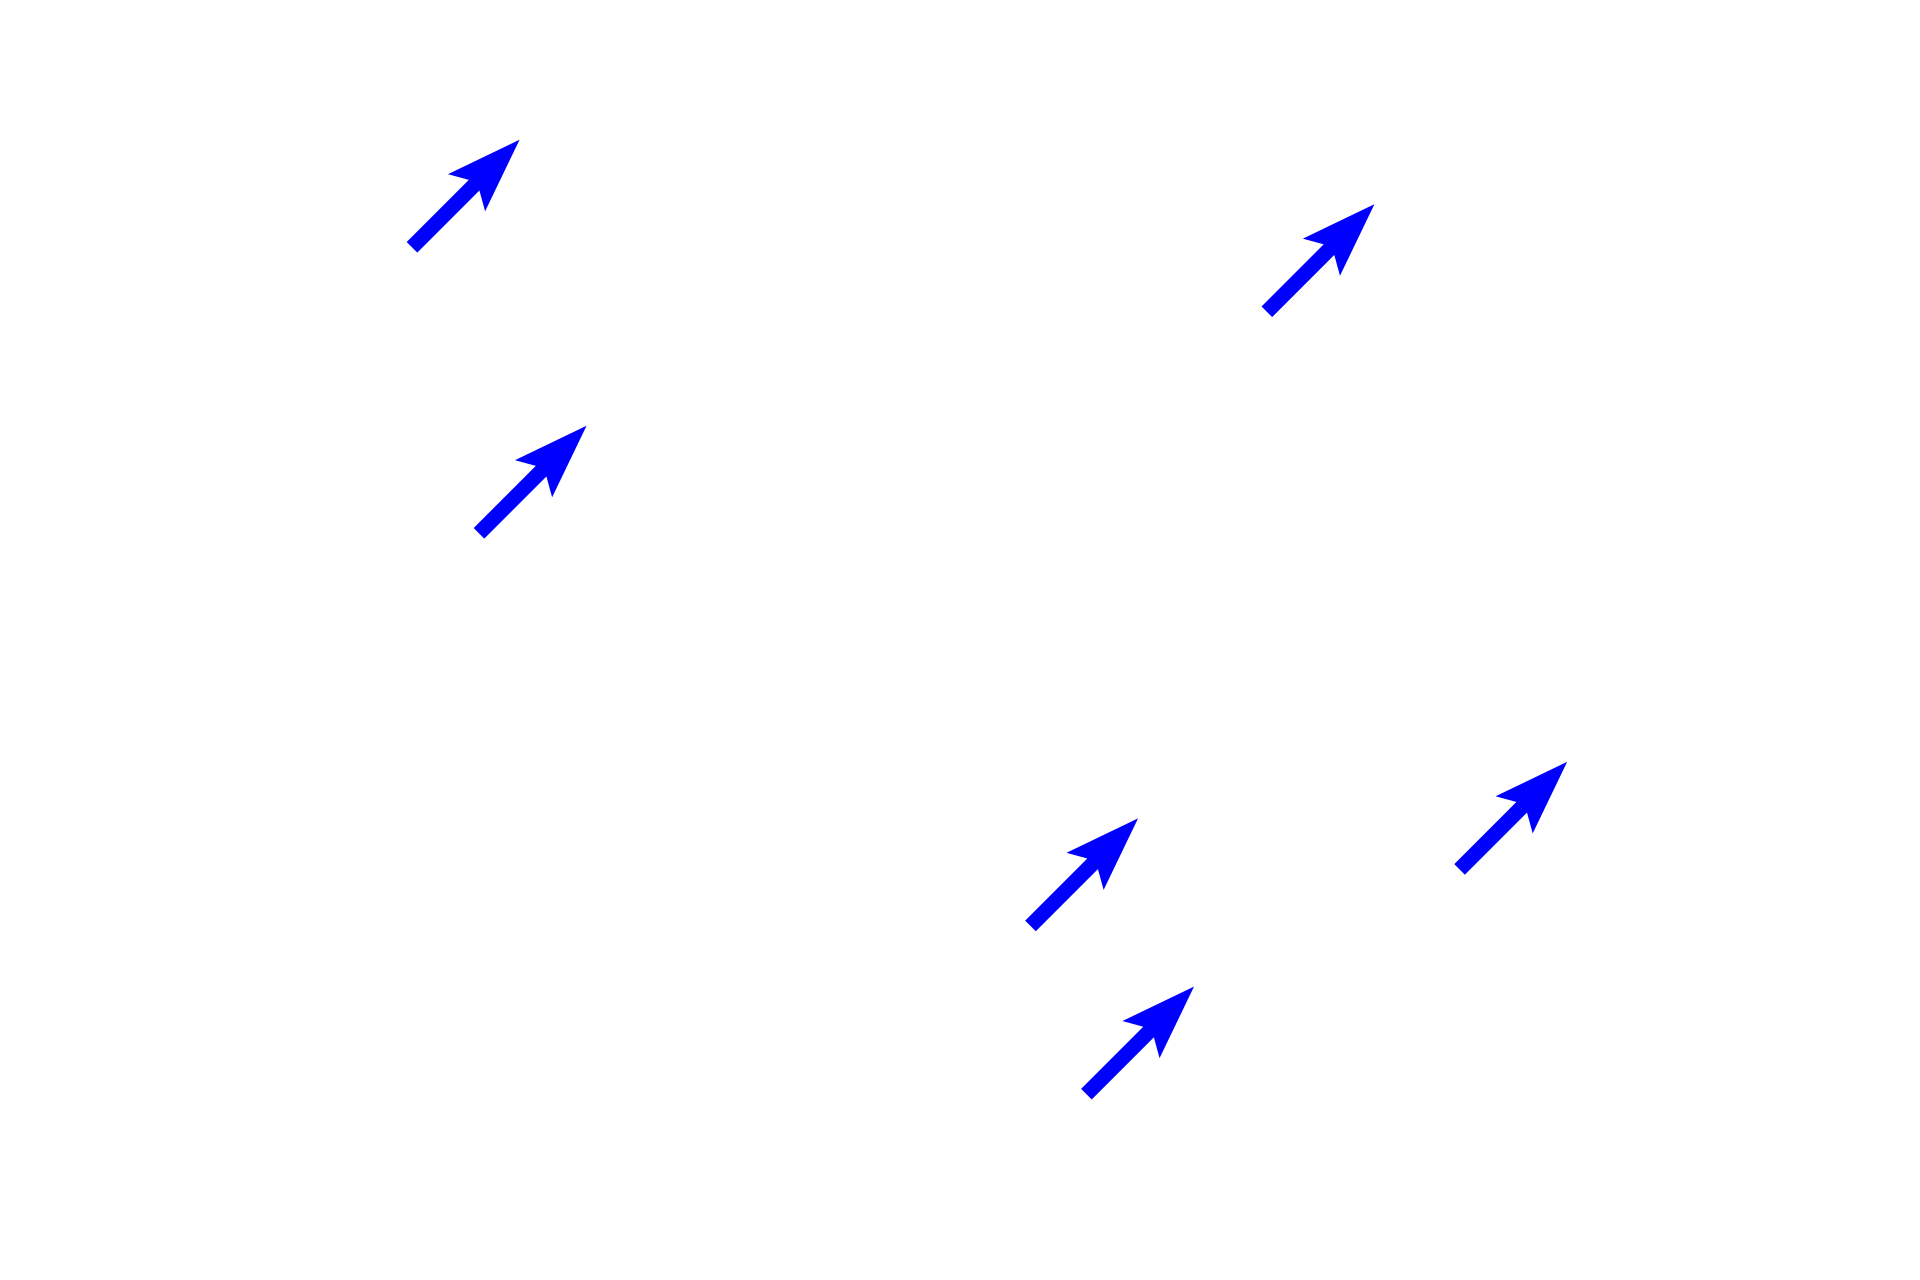  - Intercalated cells <p>Principle cells are the major target for the hormone aldosterone, which regulates the tonicity of urine. These pale-staining principle cells also line connecting ducts and other portions of collecting ducts. Intercalated cells play an important role in acid-balance balance.</p>
